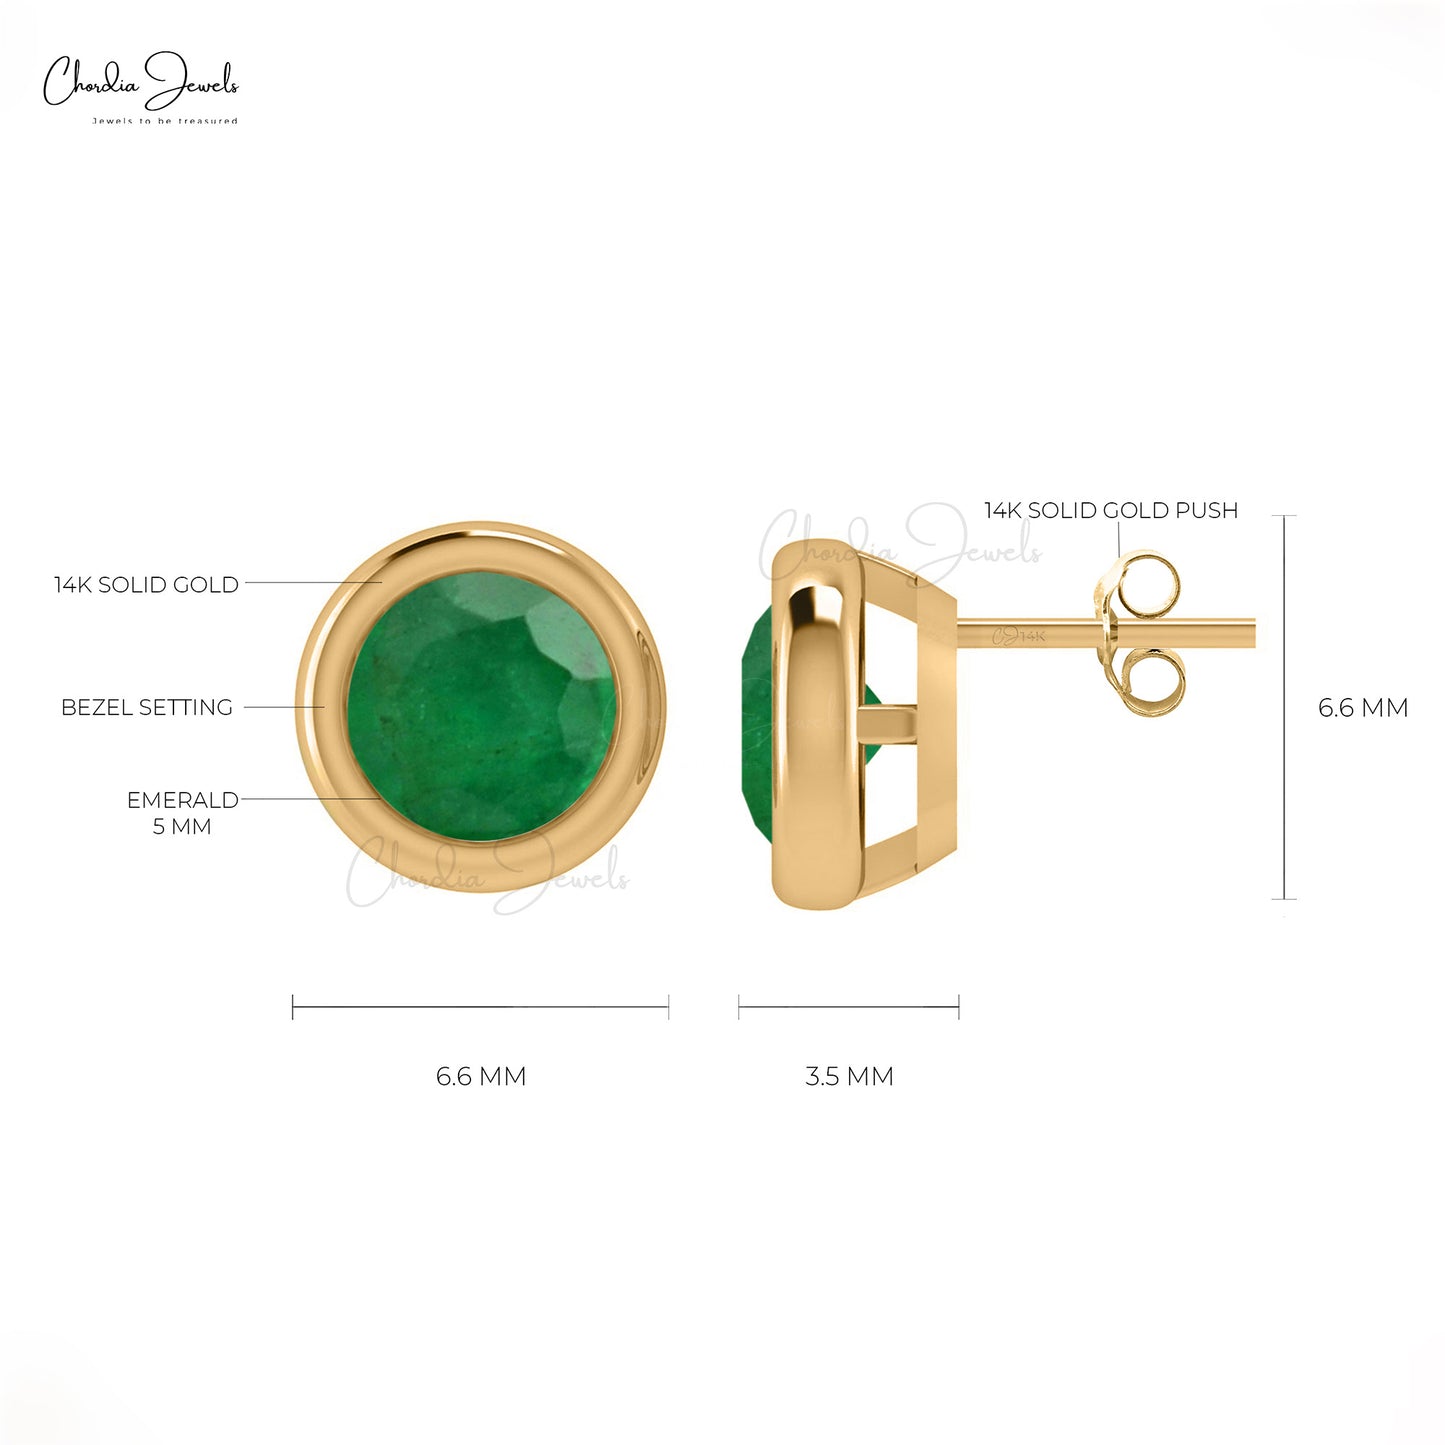 Discover the perfect blend of style with these 14k gold emerald earrings.